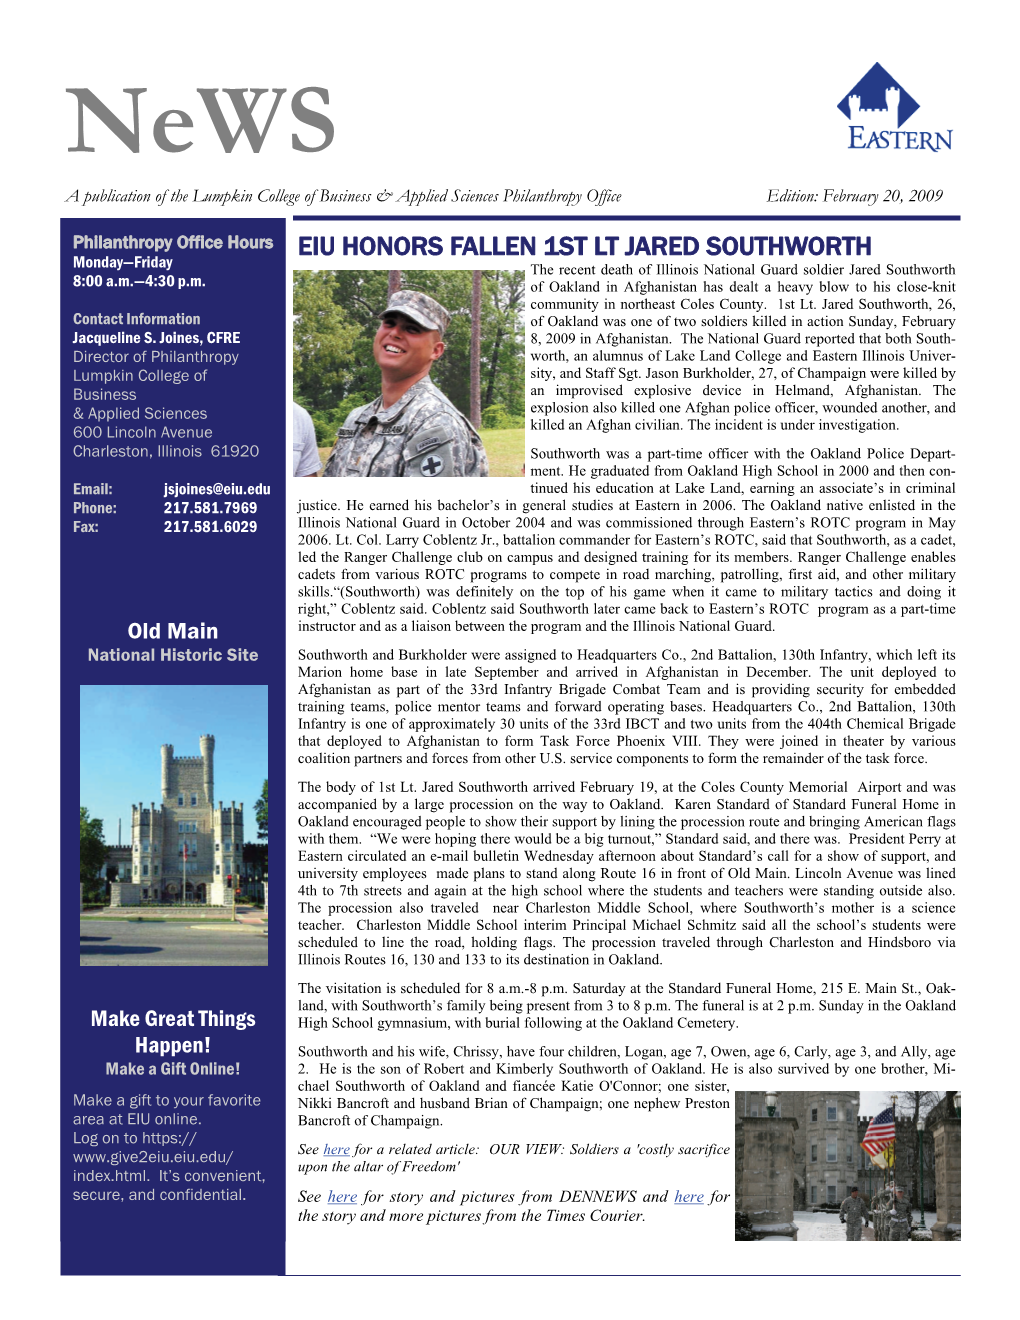 EIU HONORS FALLEN 1ST LT JARED SOUTHWORTH Monday—Friday the Recent Death of Illinois National Guard Soldier Jared Southworth 8:00 A.M.—4:30 P.M